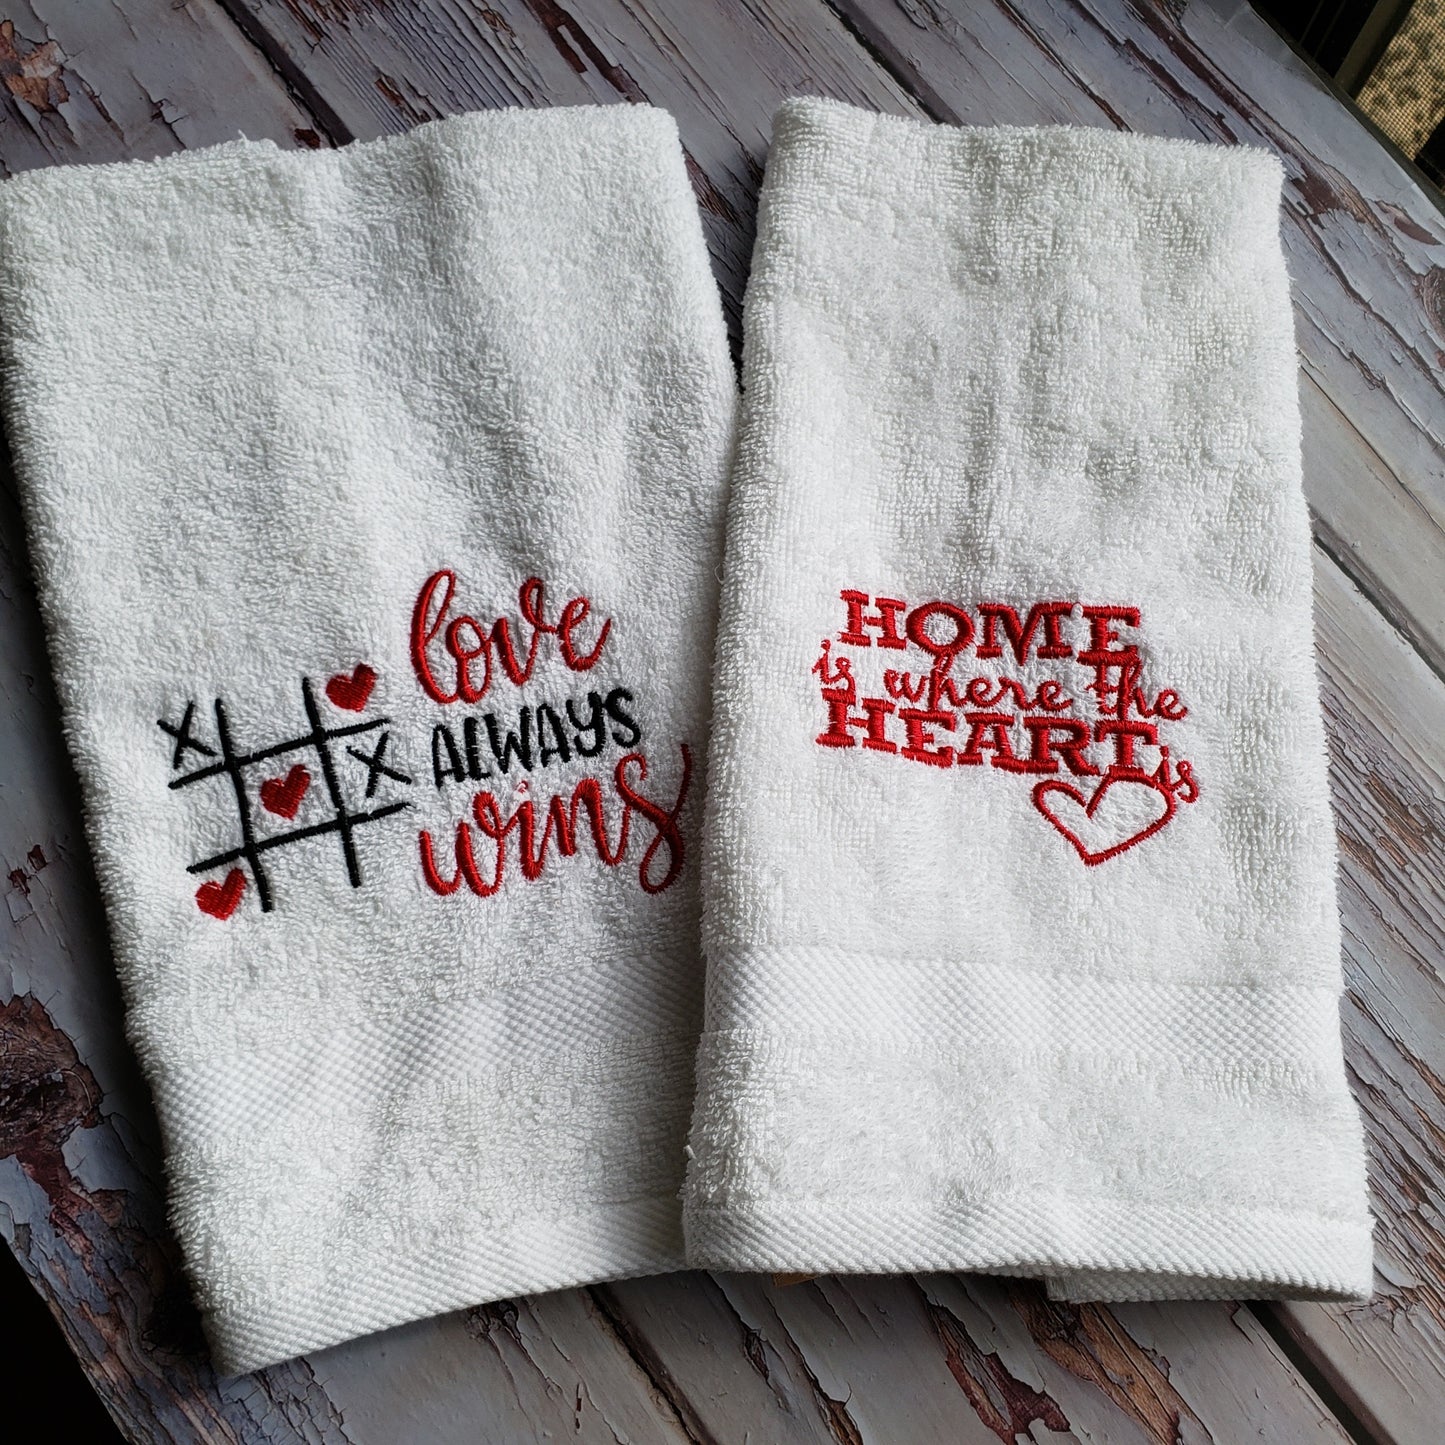 hand towel embroidered